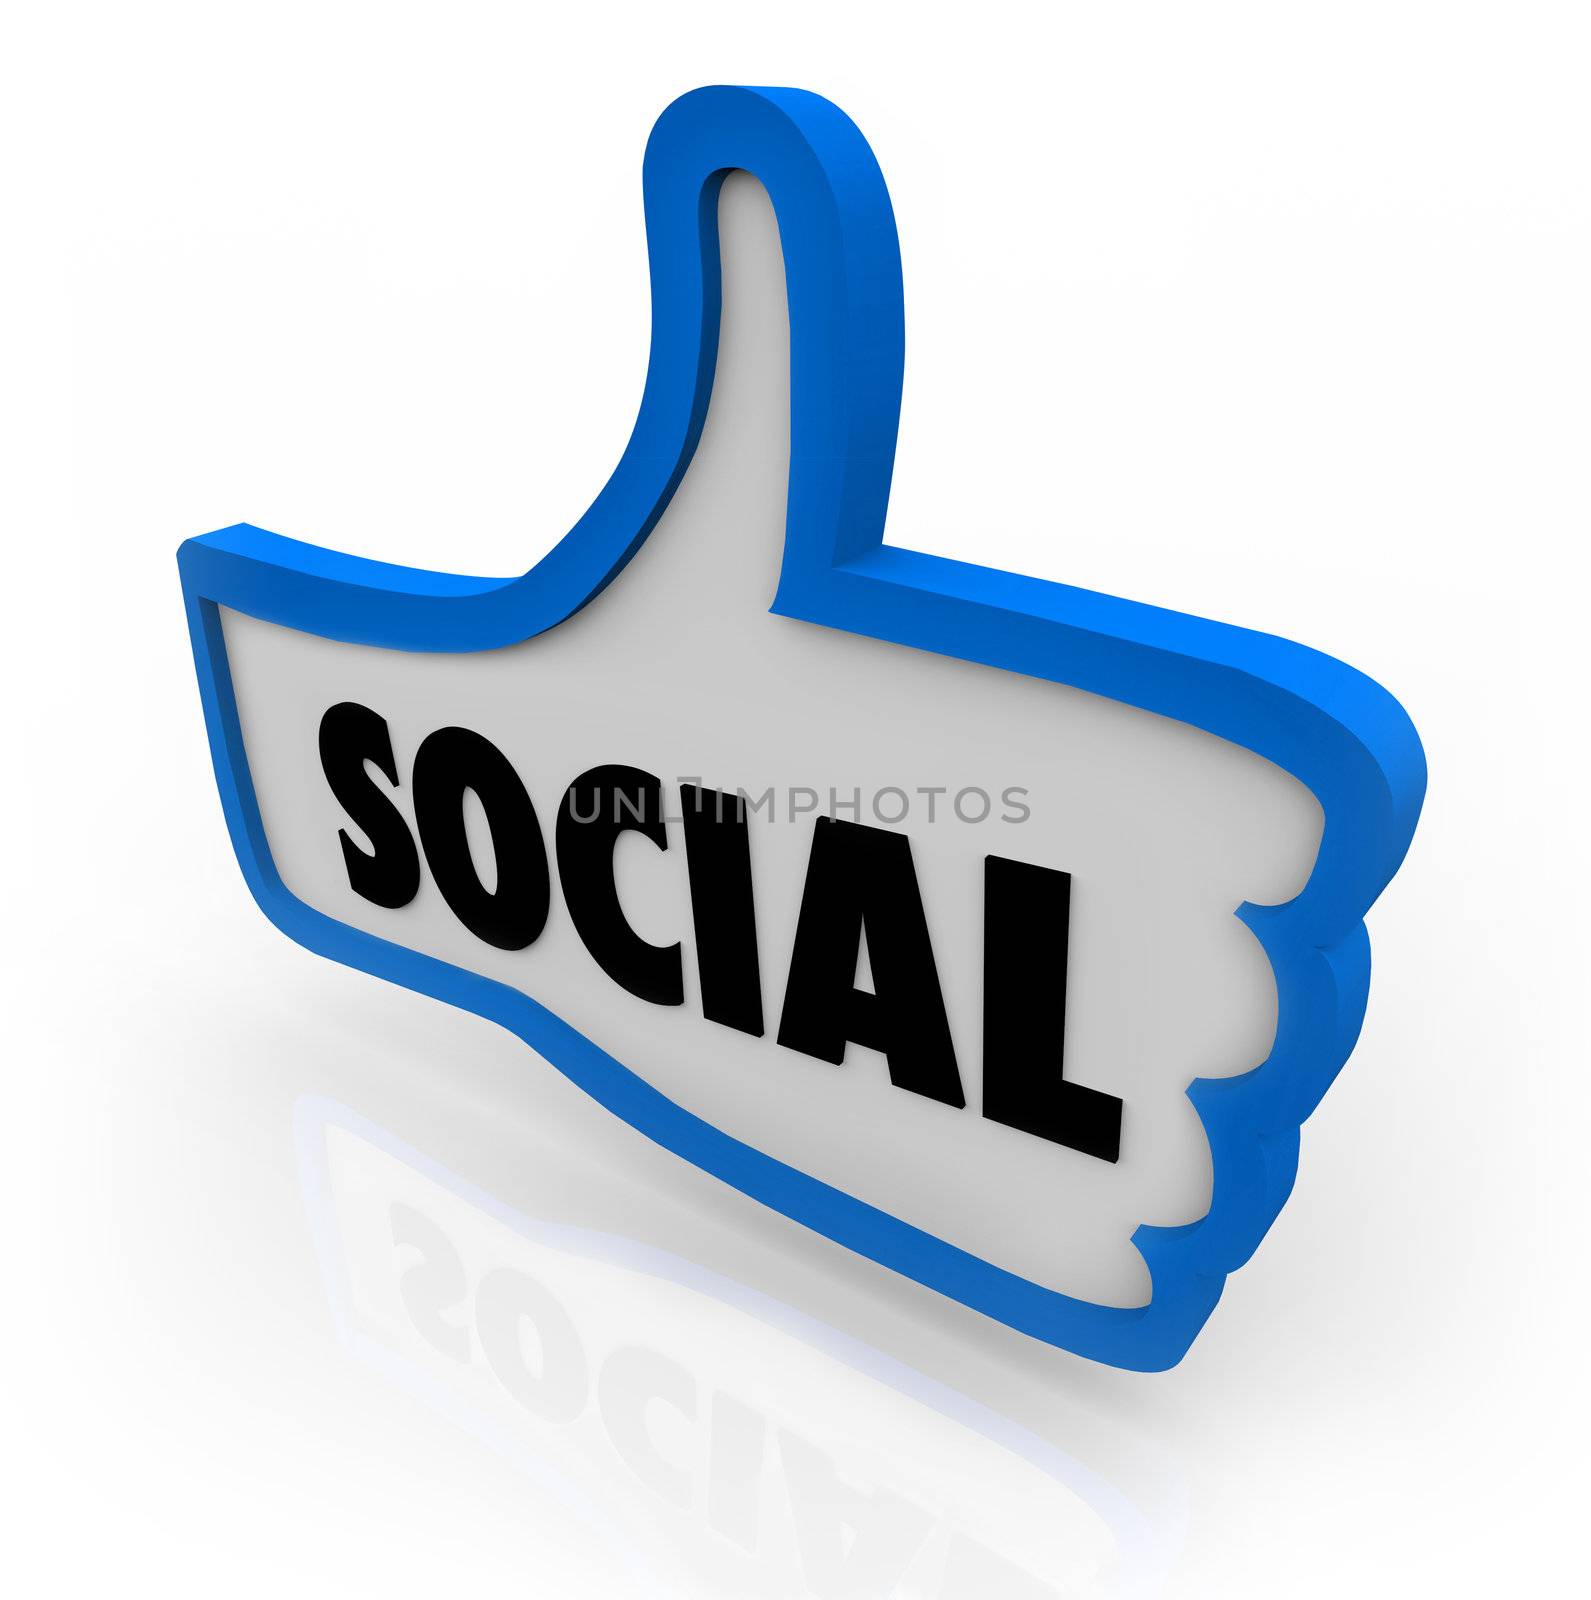 The word Social on a blue thumb's up symbol to illustrate a social network or other formate for online communication or discourse with friends, family and other people